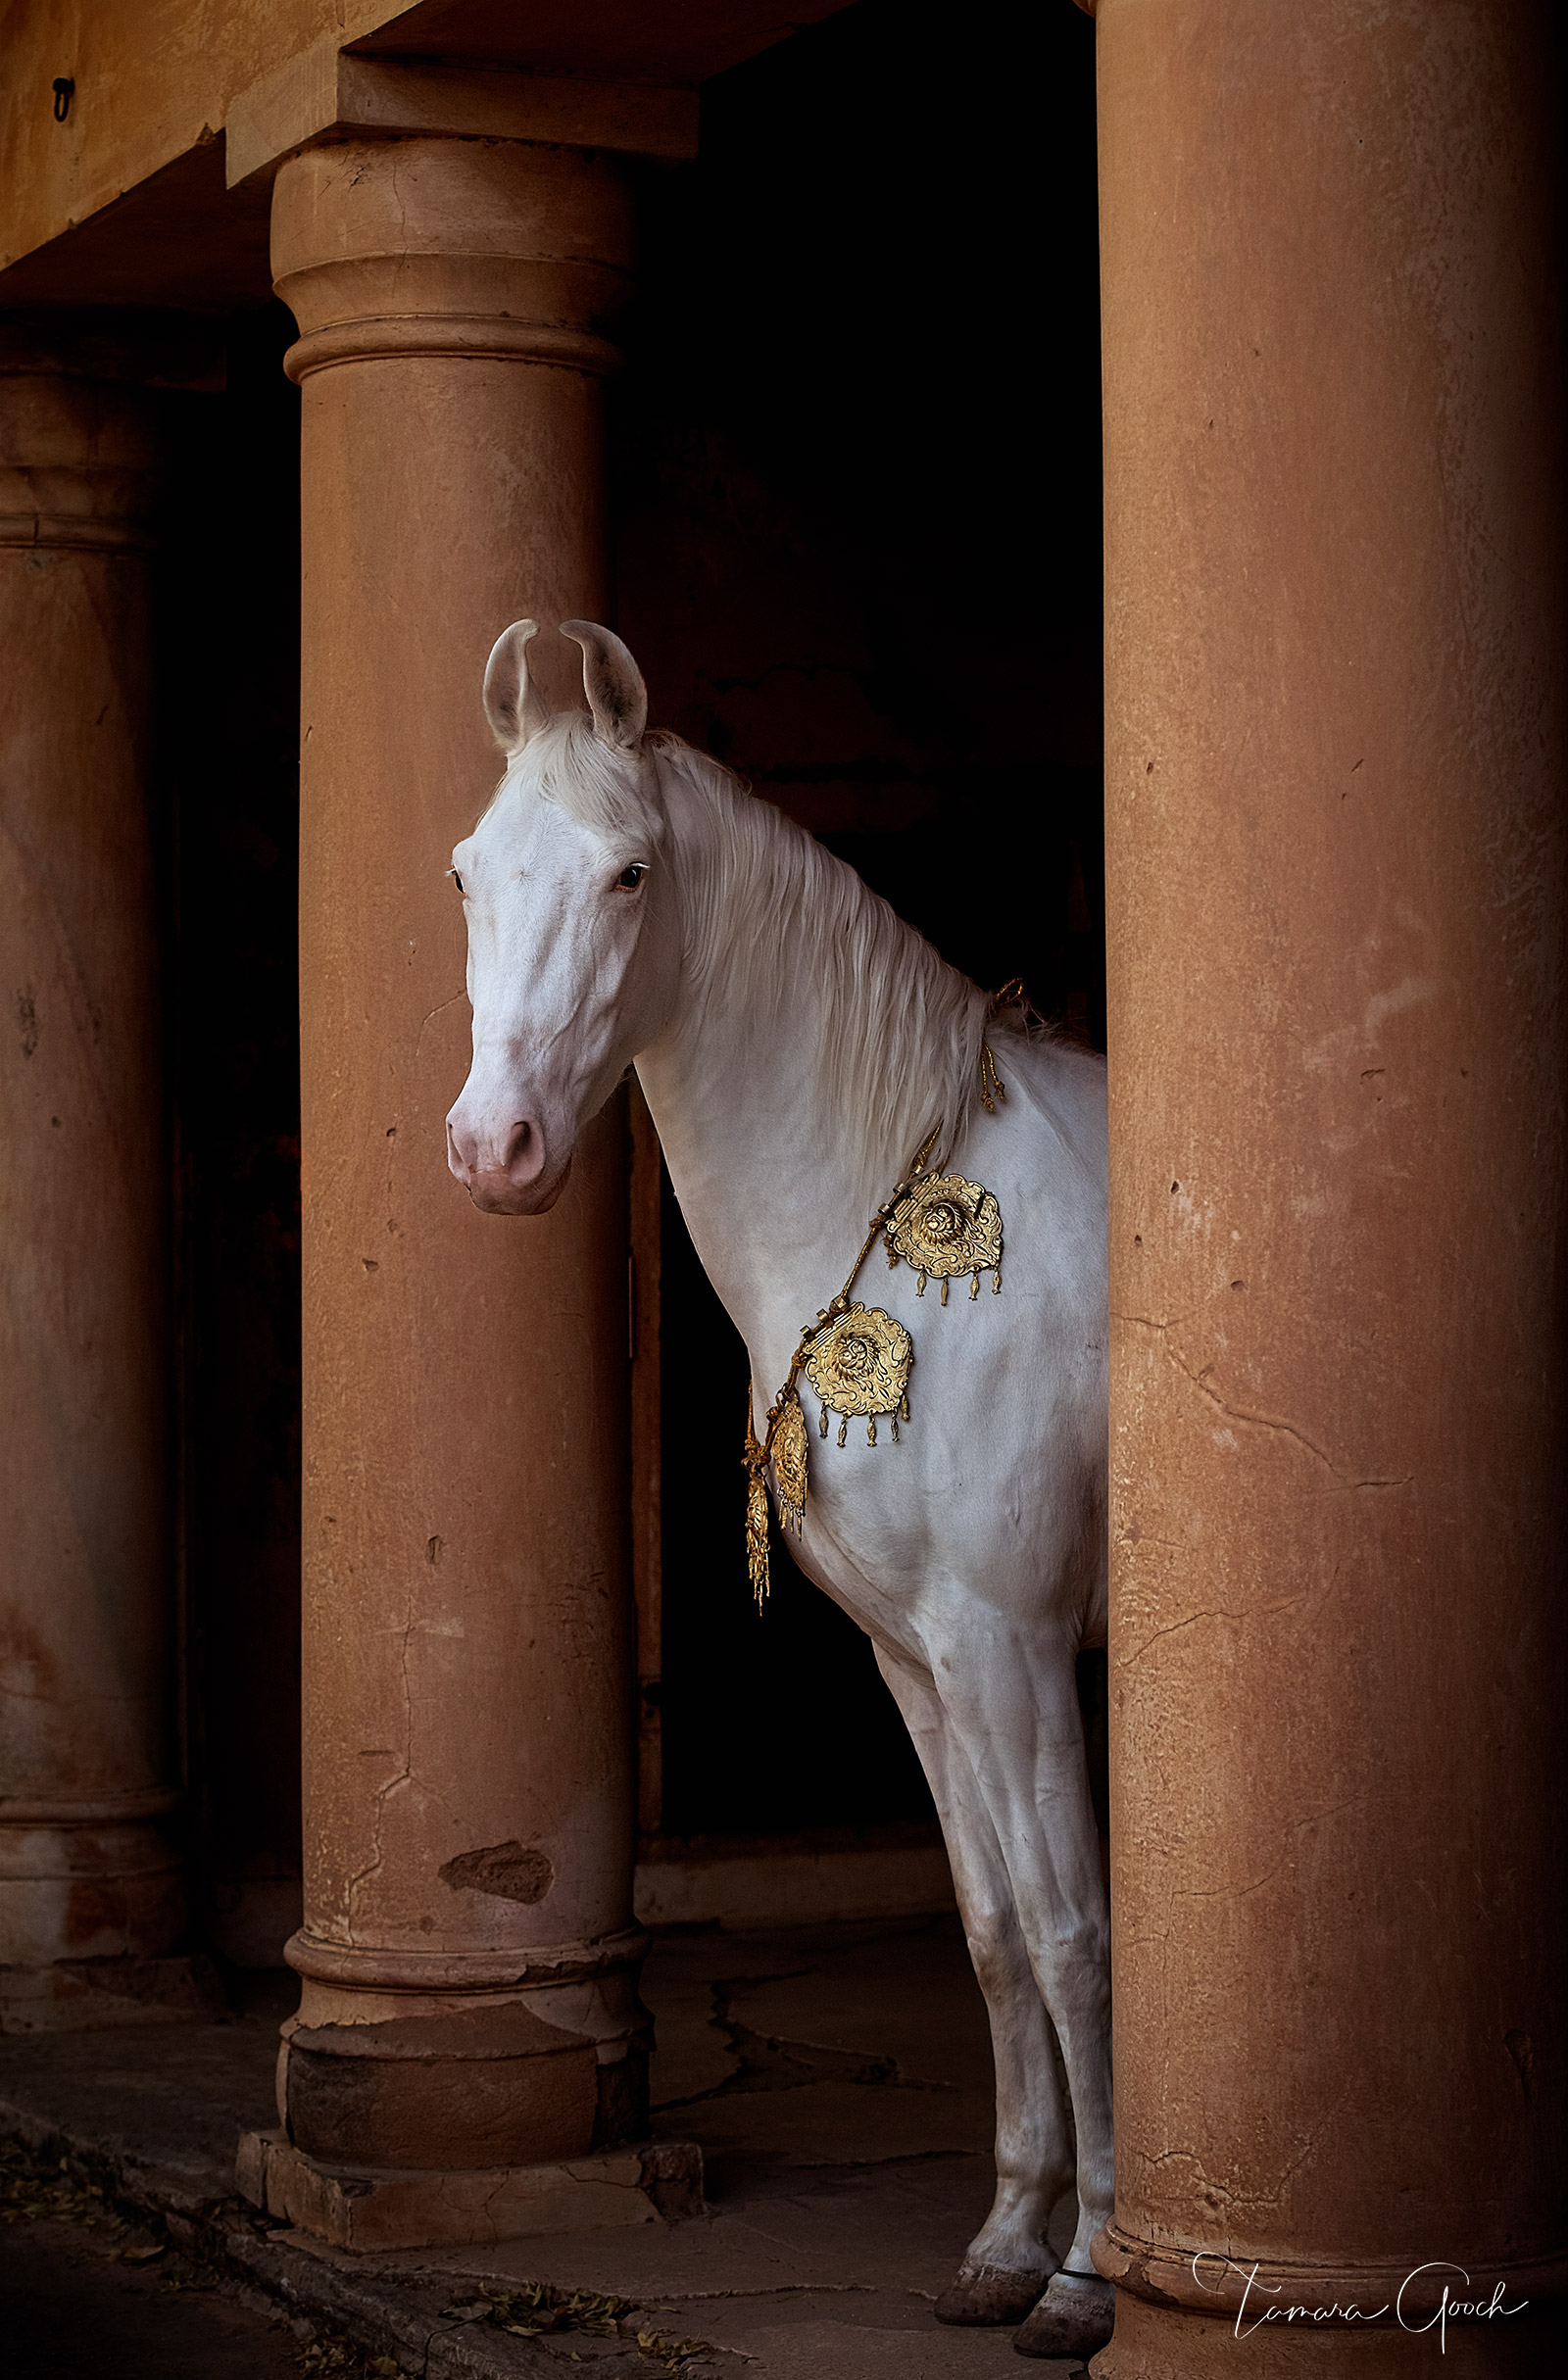 Gallery quality photo print of a Marwari Horse in ancient ruins 